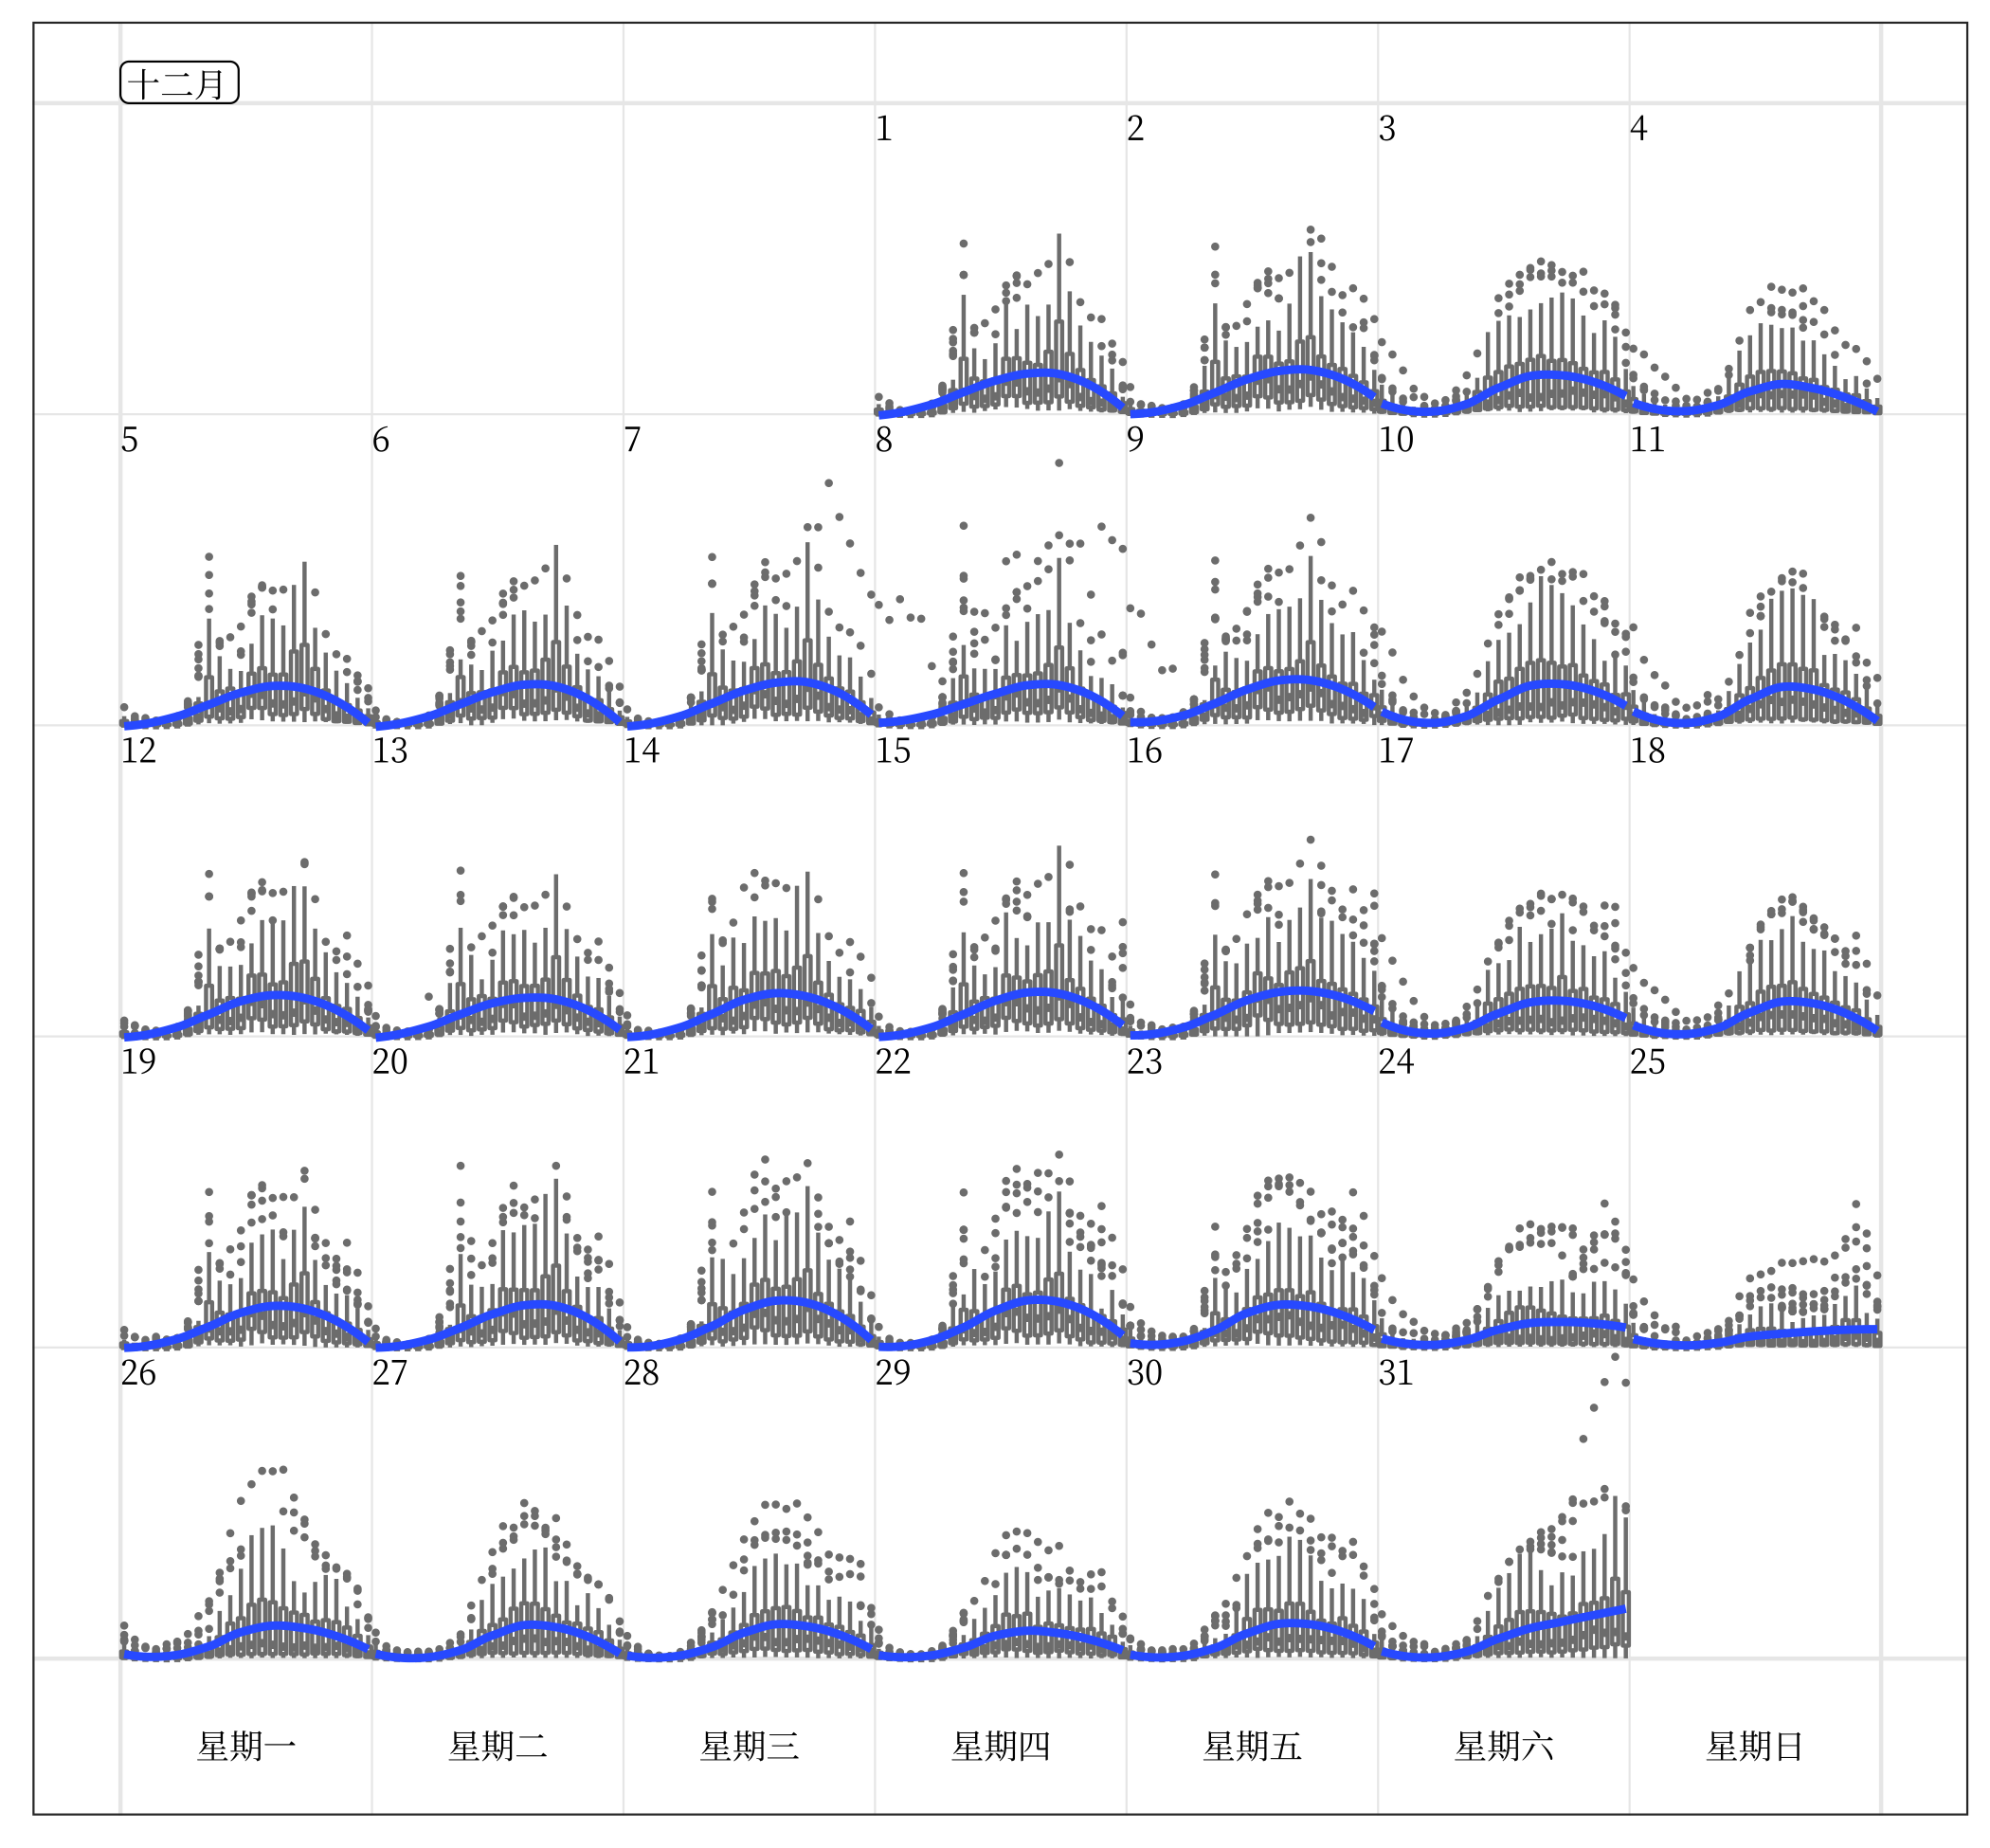 Side-by-side boxplots of hourly counts for all the 43 sensors in December 2016, with the loess smooth line superimposed on each day. It shows the hourly distribution in the city as a whole. The increased variability is notable on the last day of December as New Year’s Eve approaches. The month and weekday are labeled in Chinese, which demonstrates the support for languages other than English.